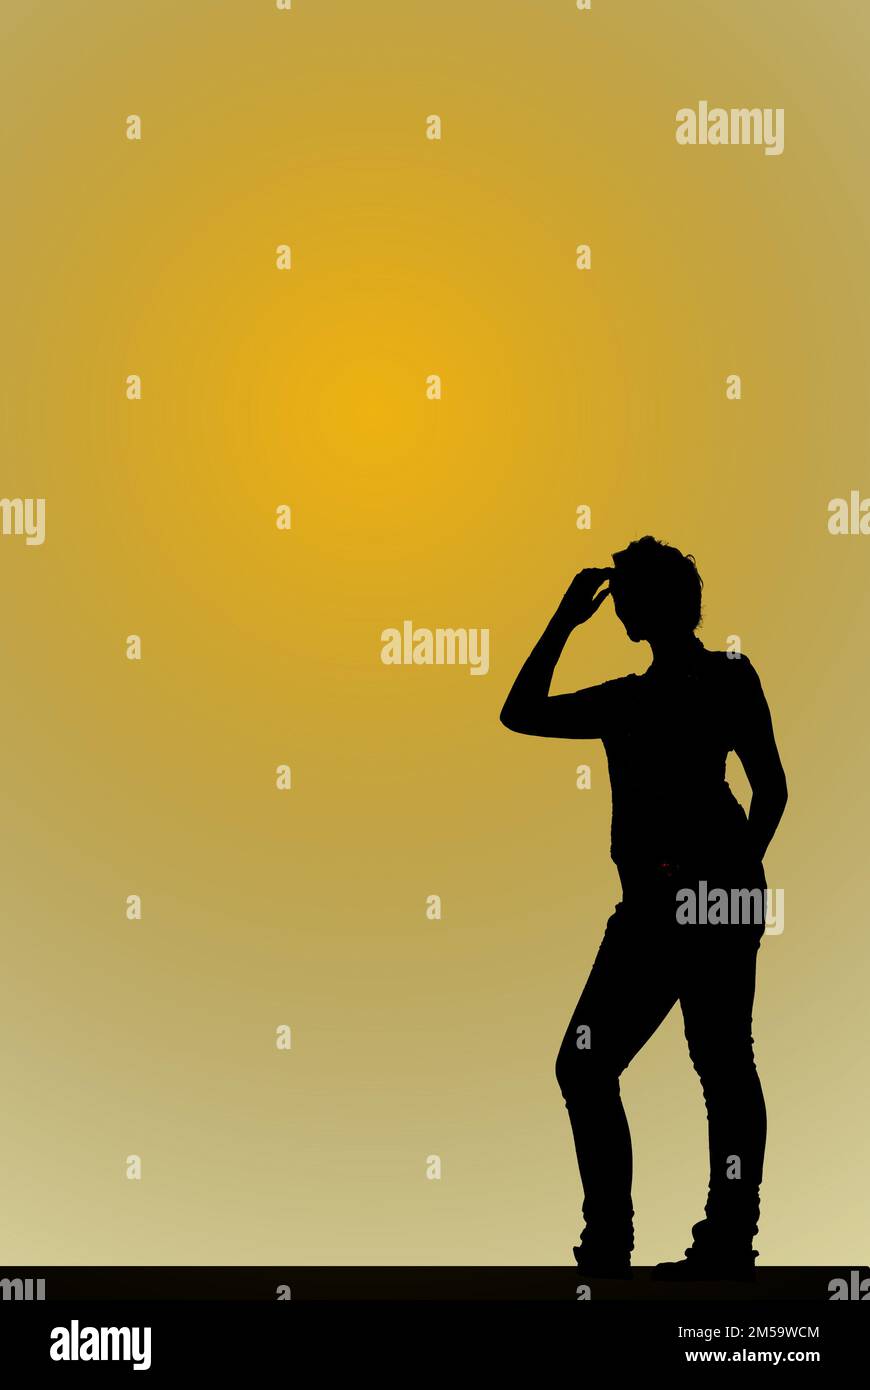 girl with hand to head silhouetted against orange background Stock Photo